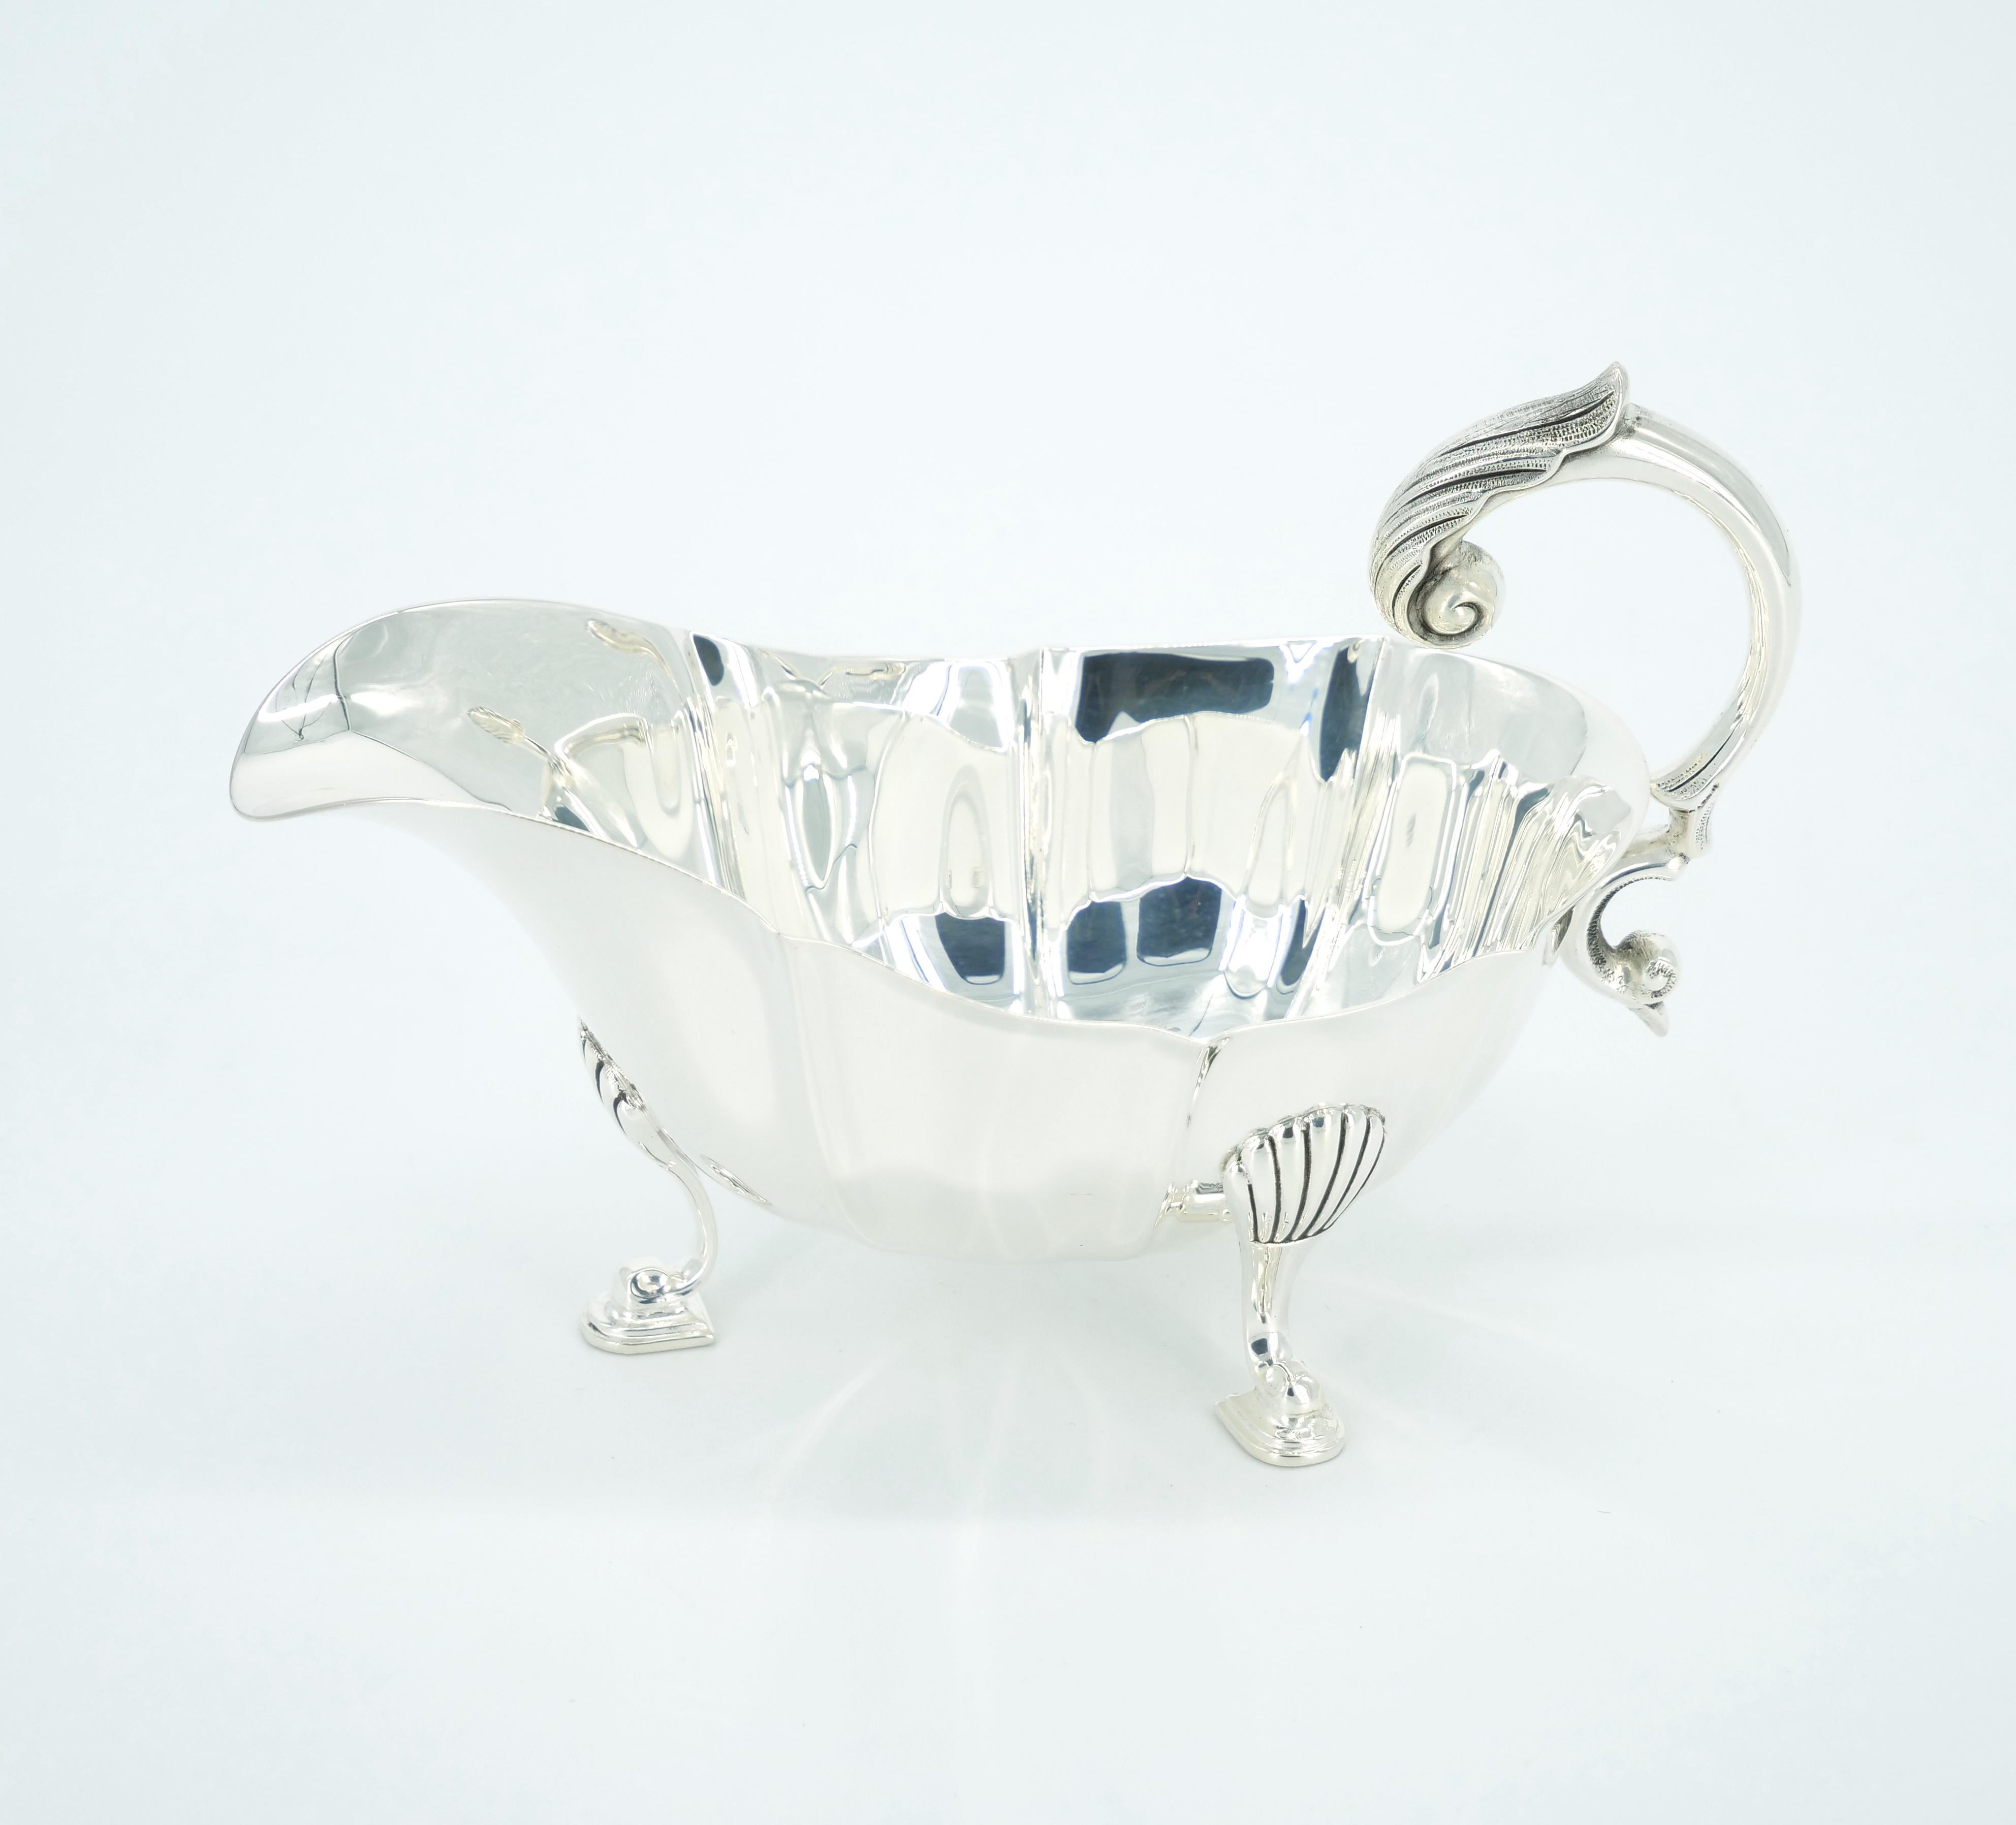 Elevate your dining experience with this exquisite Italian Silver Plated Tableware Footed Serving Piece – a stunning sauce boat that seamlessly blends functionality with elegance. Crafted with meticulous attention to detail, the boat-shaped design